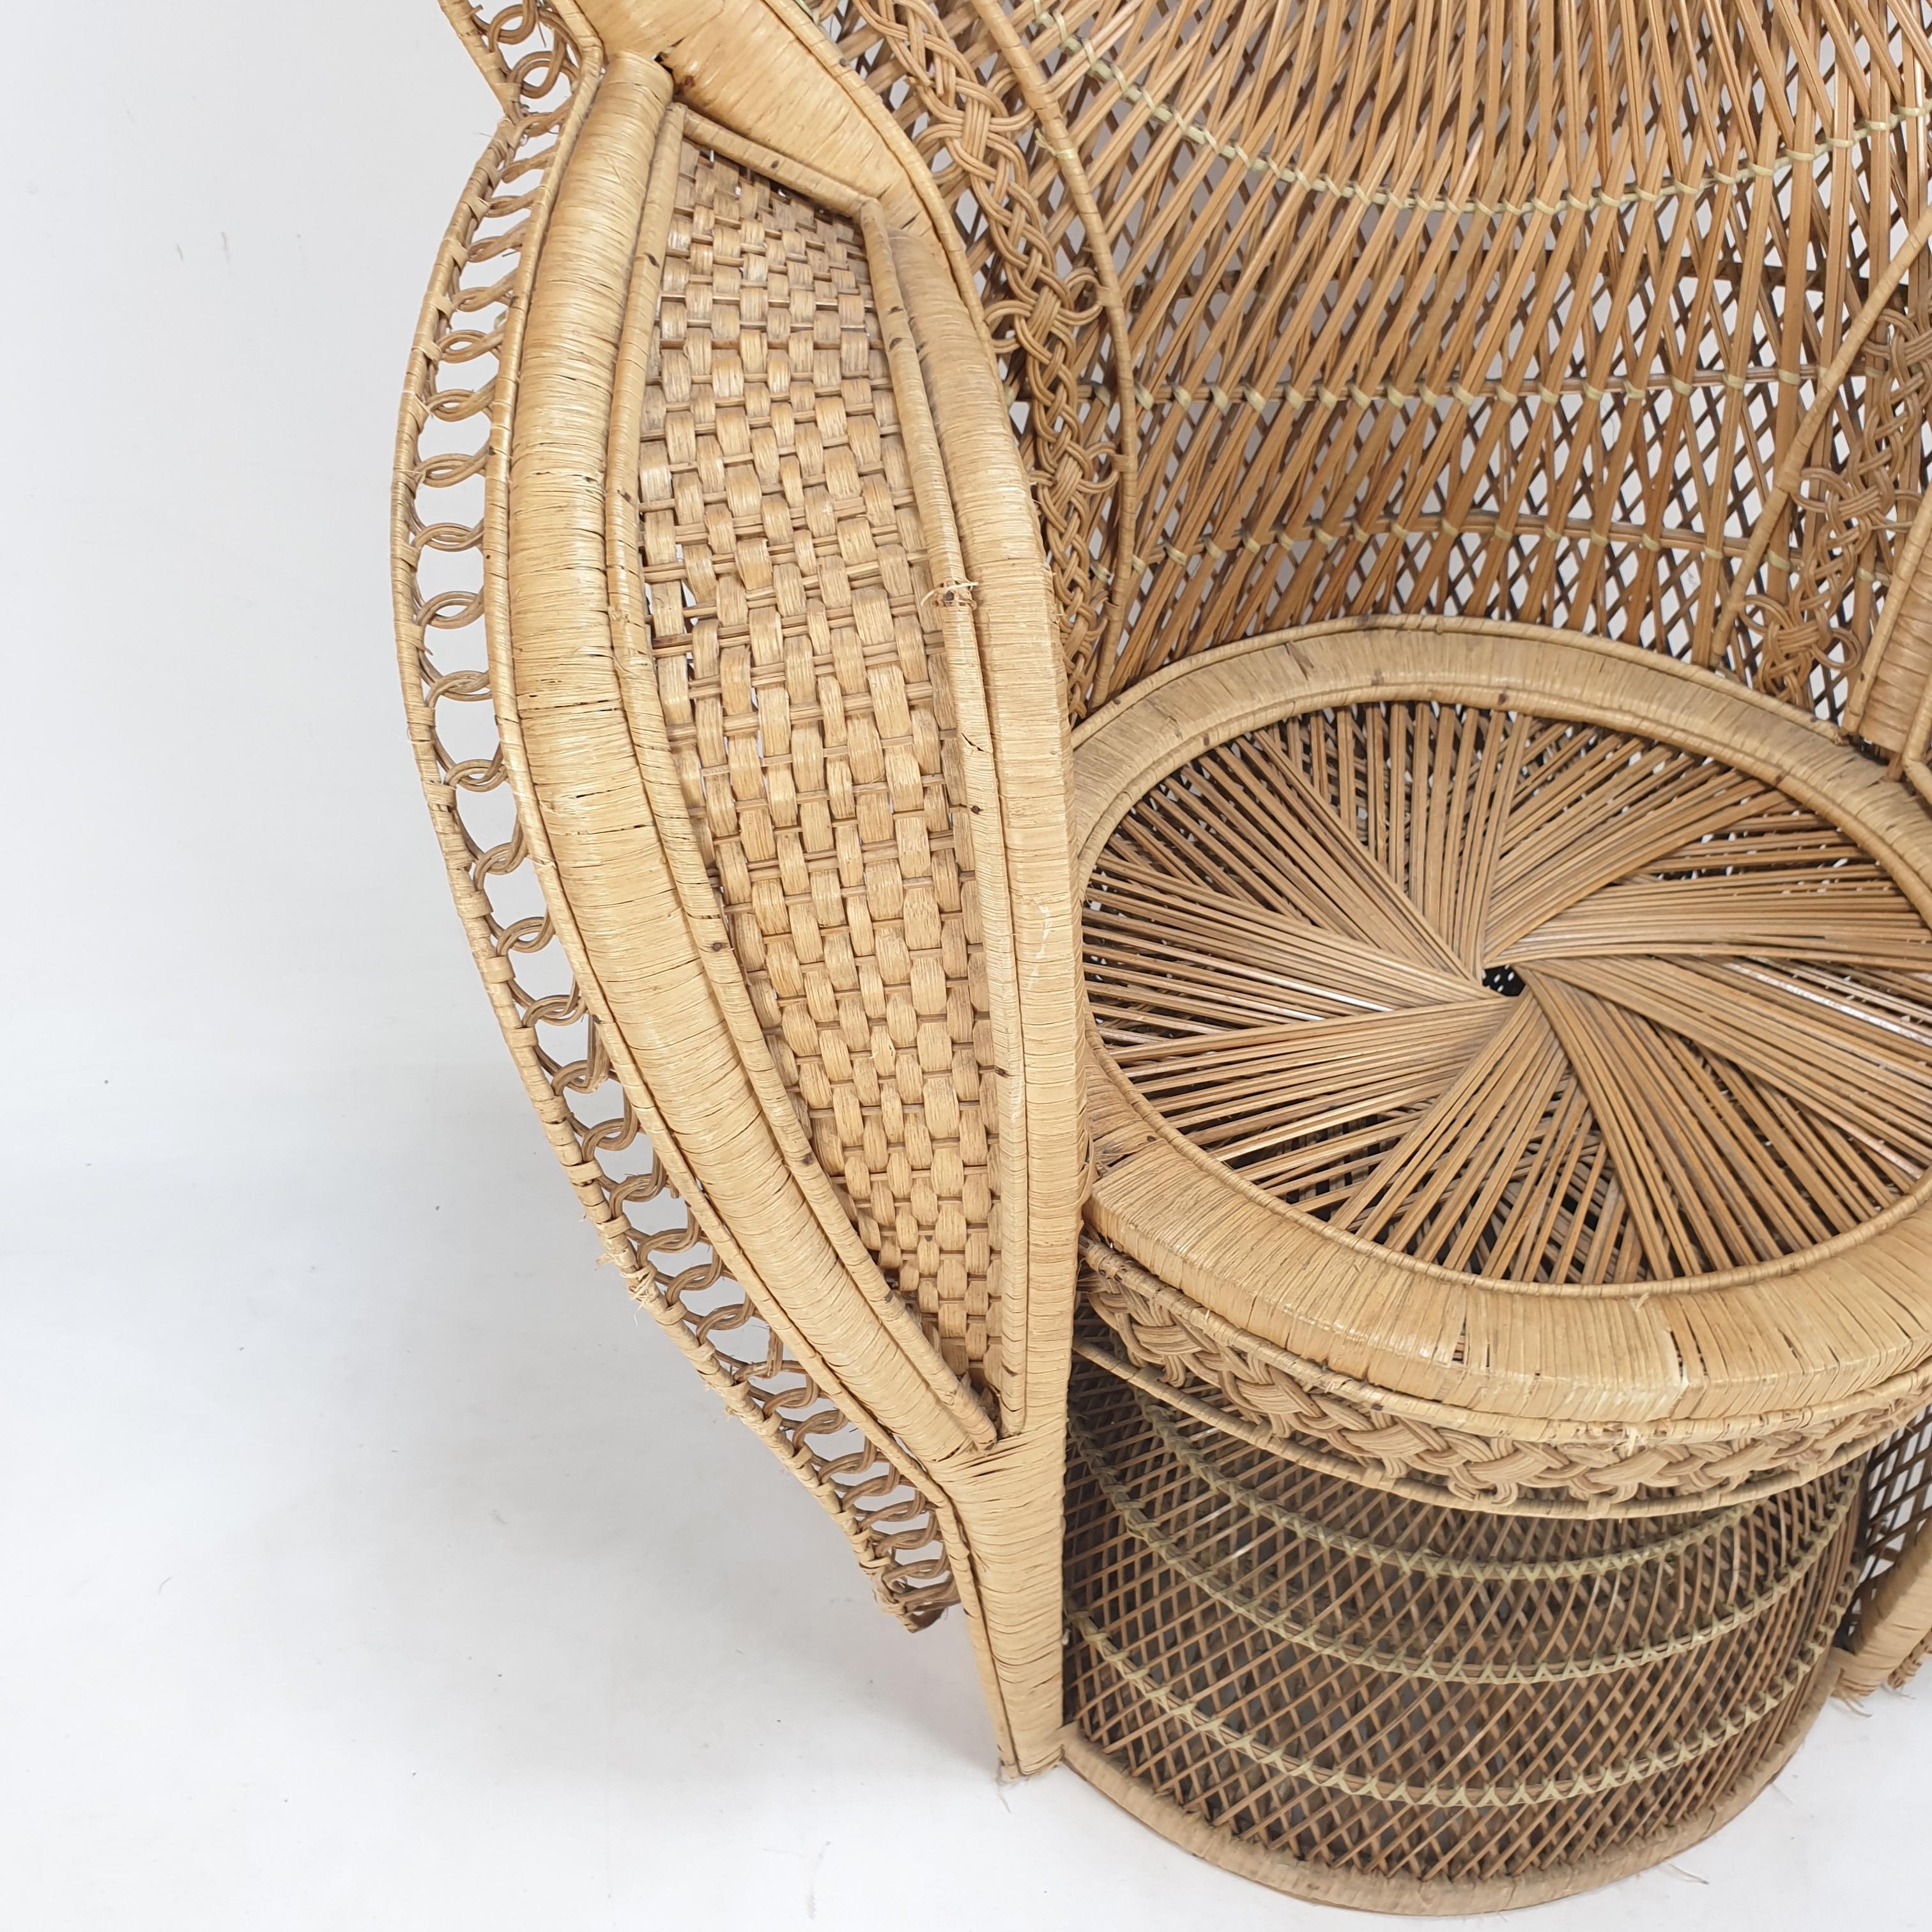 Midcentury Emmanuelle or Peacock Rattan and Wicker Chair, Italy 1960s For Sale 5